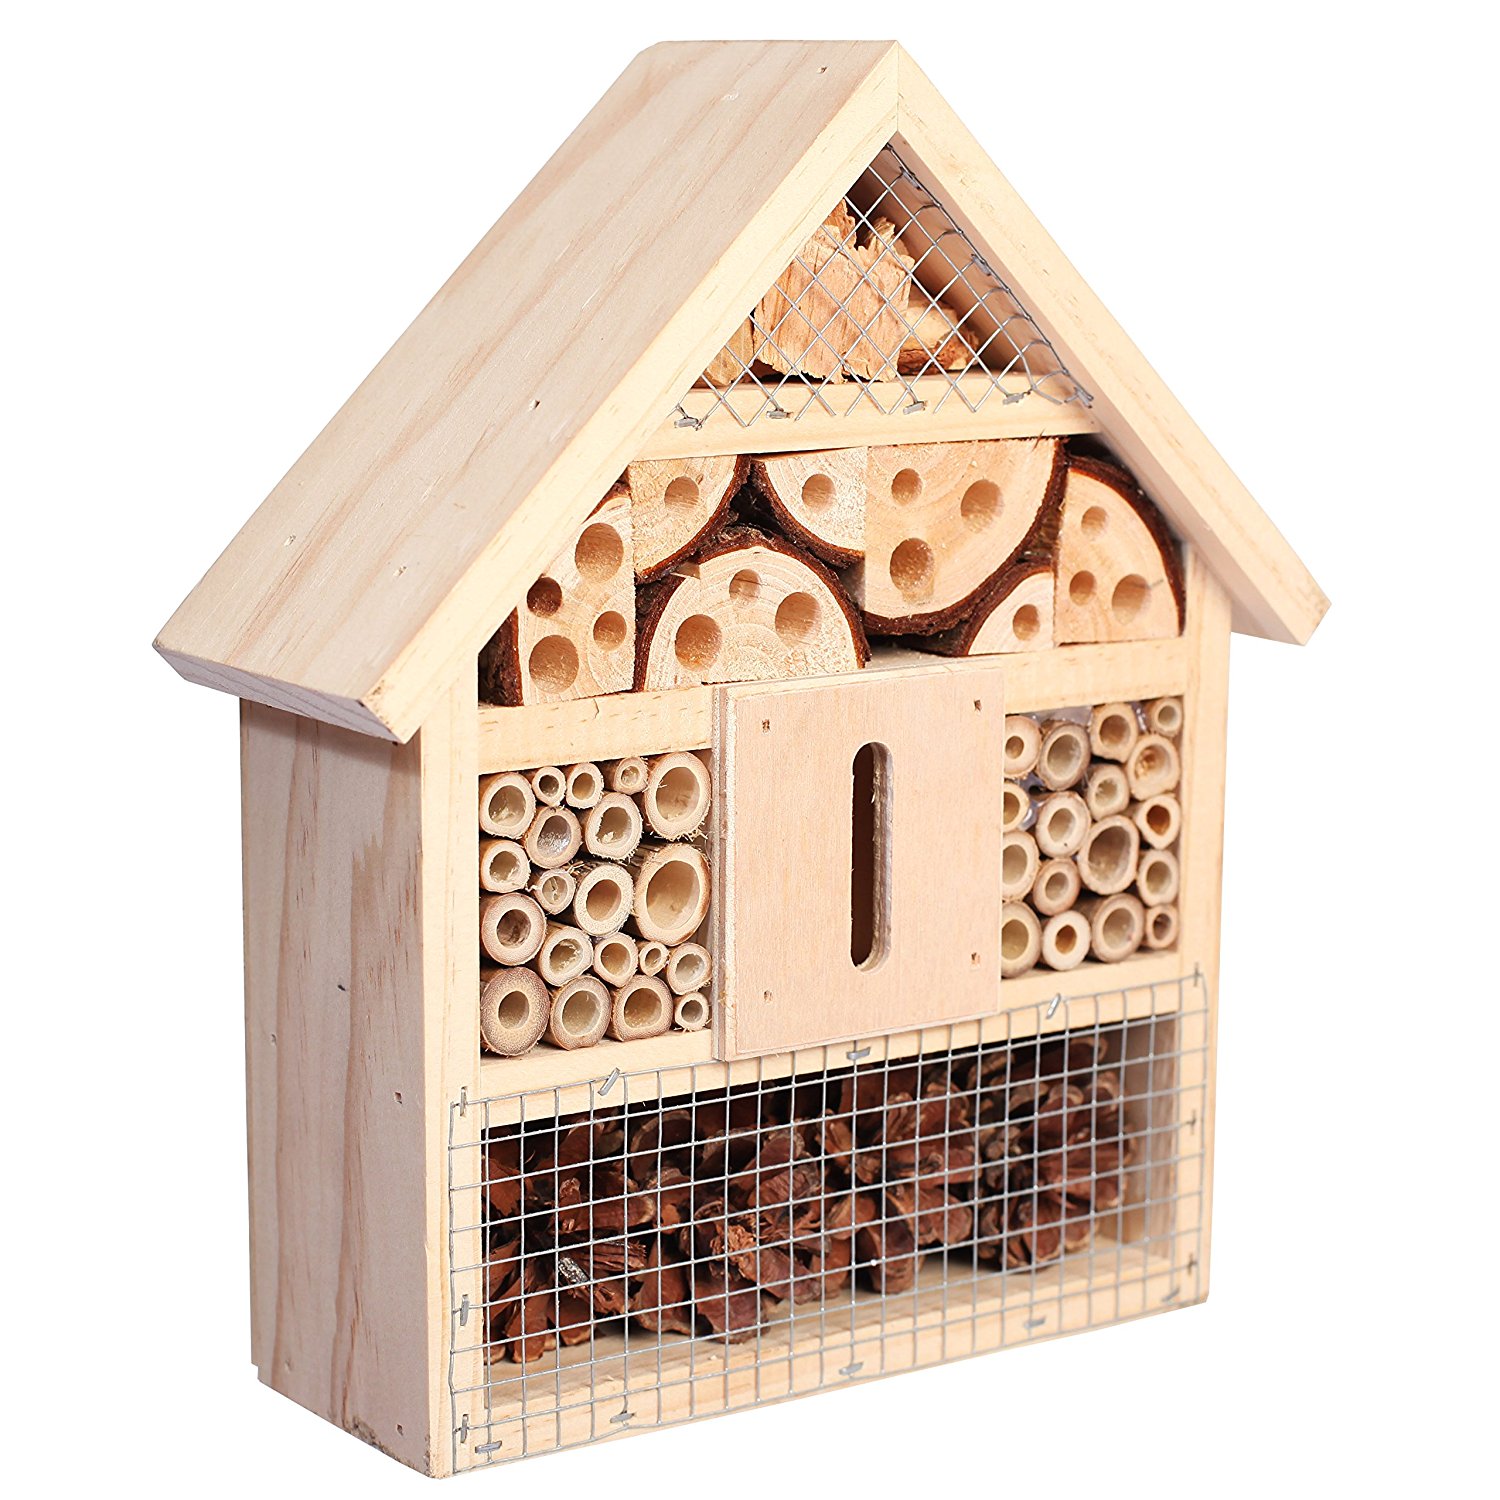 Amazon.com: Niteangel Natural Insect Hotel Bee Bug House/Hotel ...